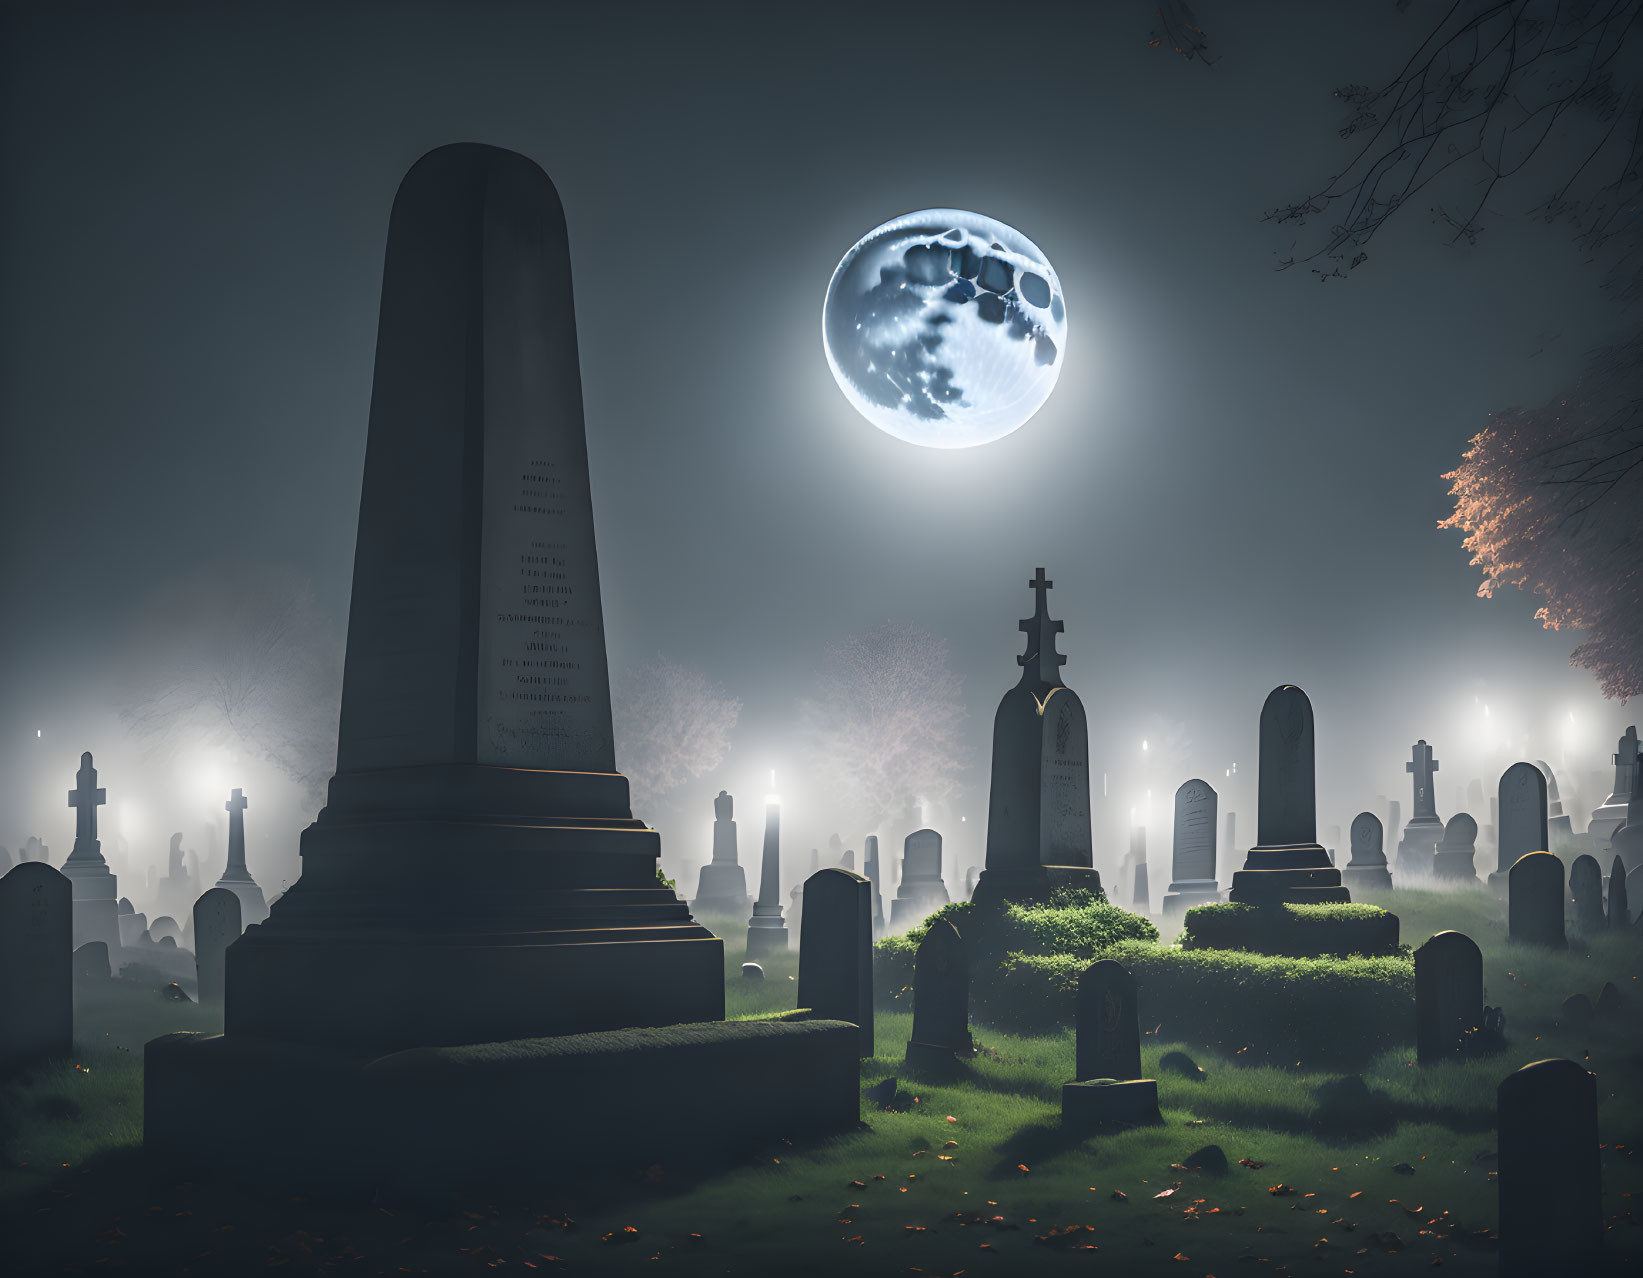 Ethereal moonlit cemetery with obelisk and tombstones